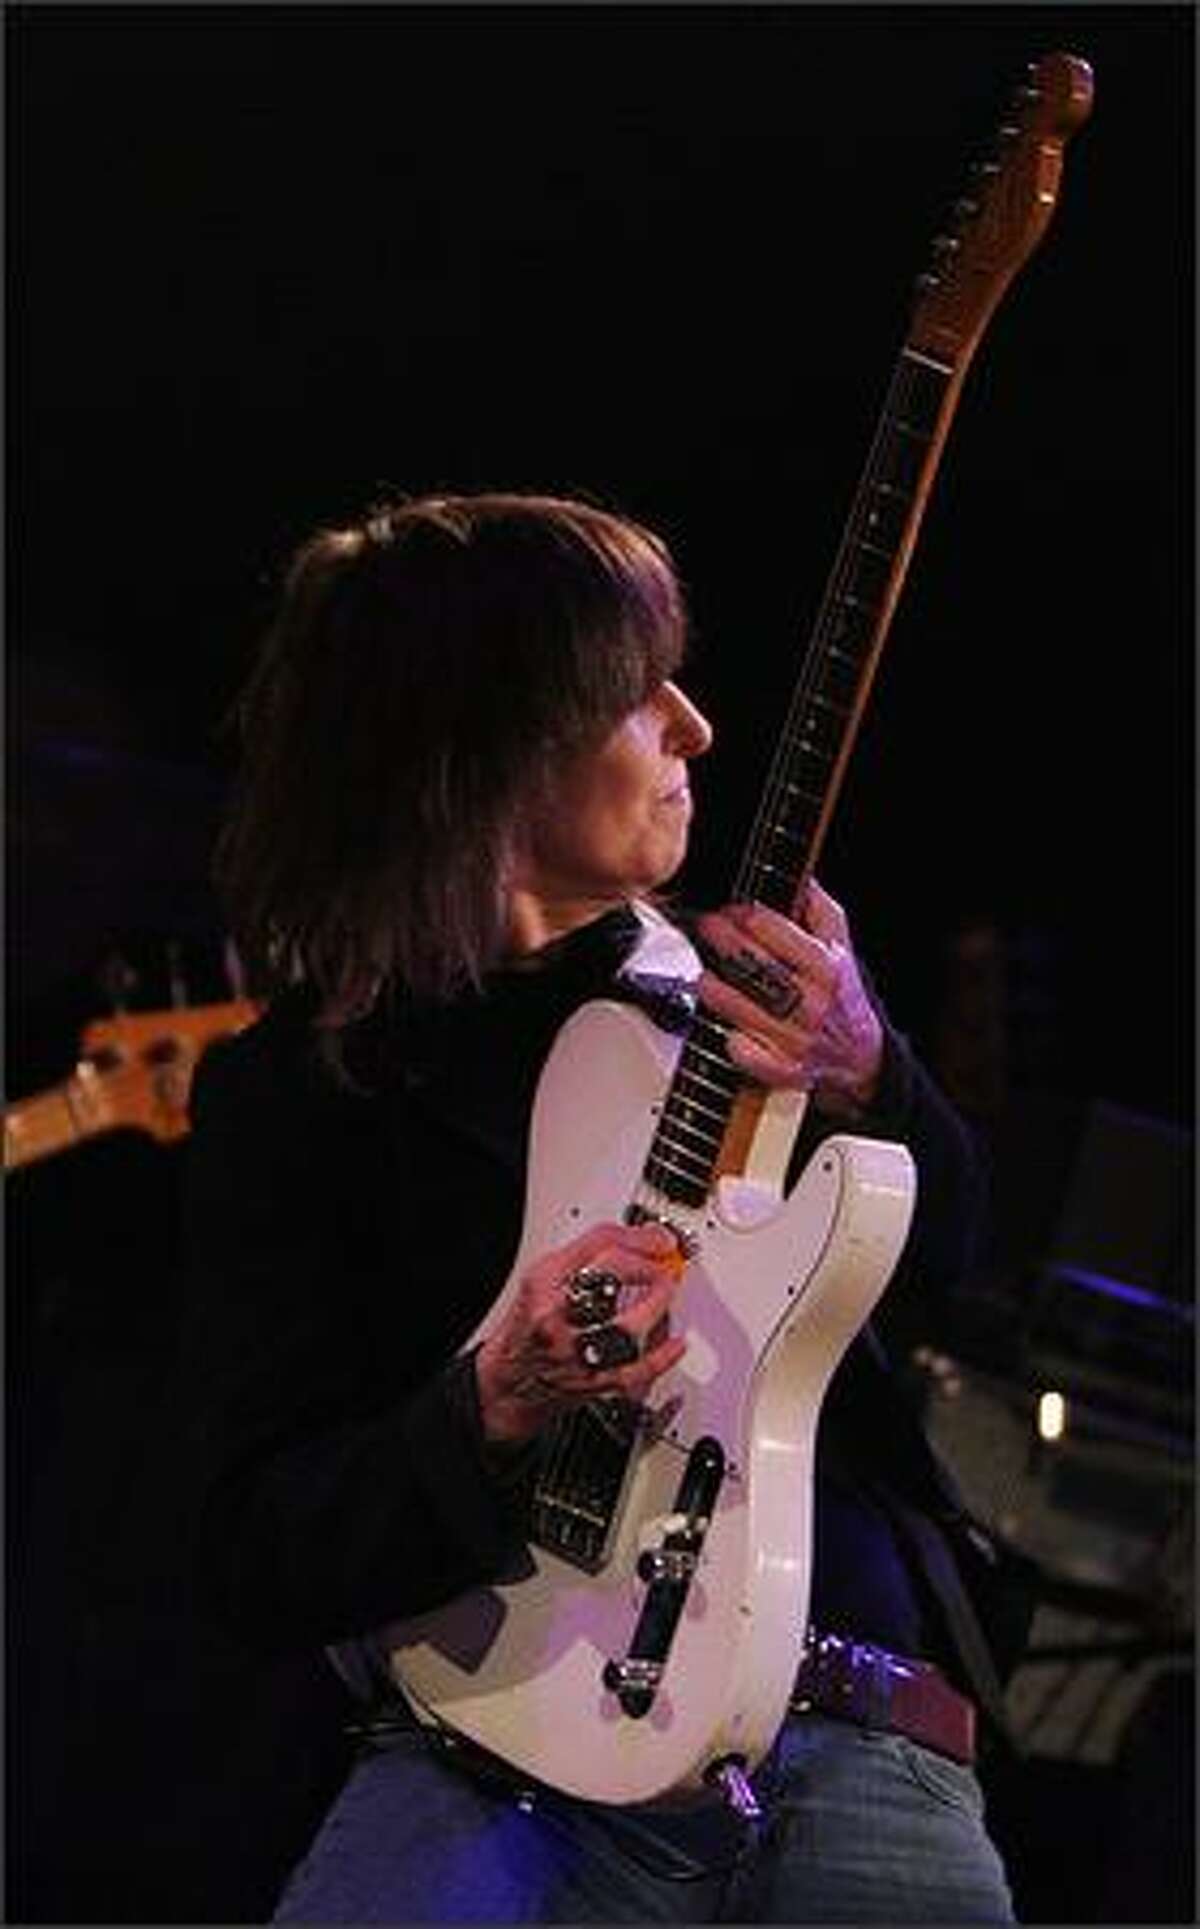 Chrissie Hynde and The Pretenders perform during the 103.7 The Mountain Winter Warmth Concert at The Paramount Theatre on Saturday.